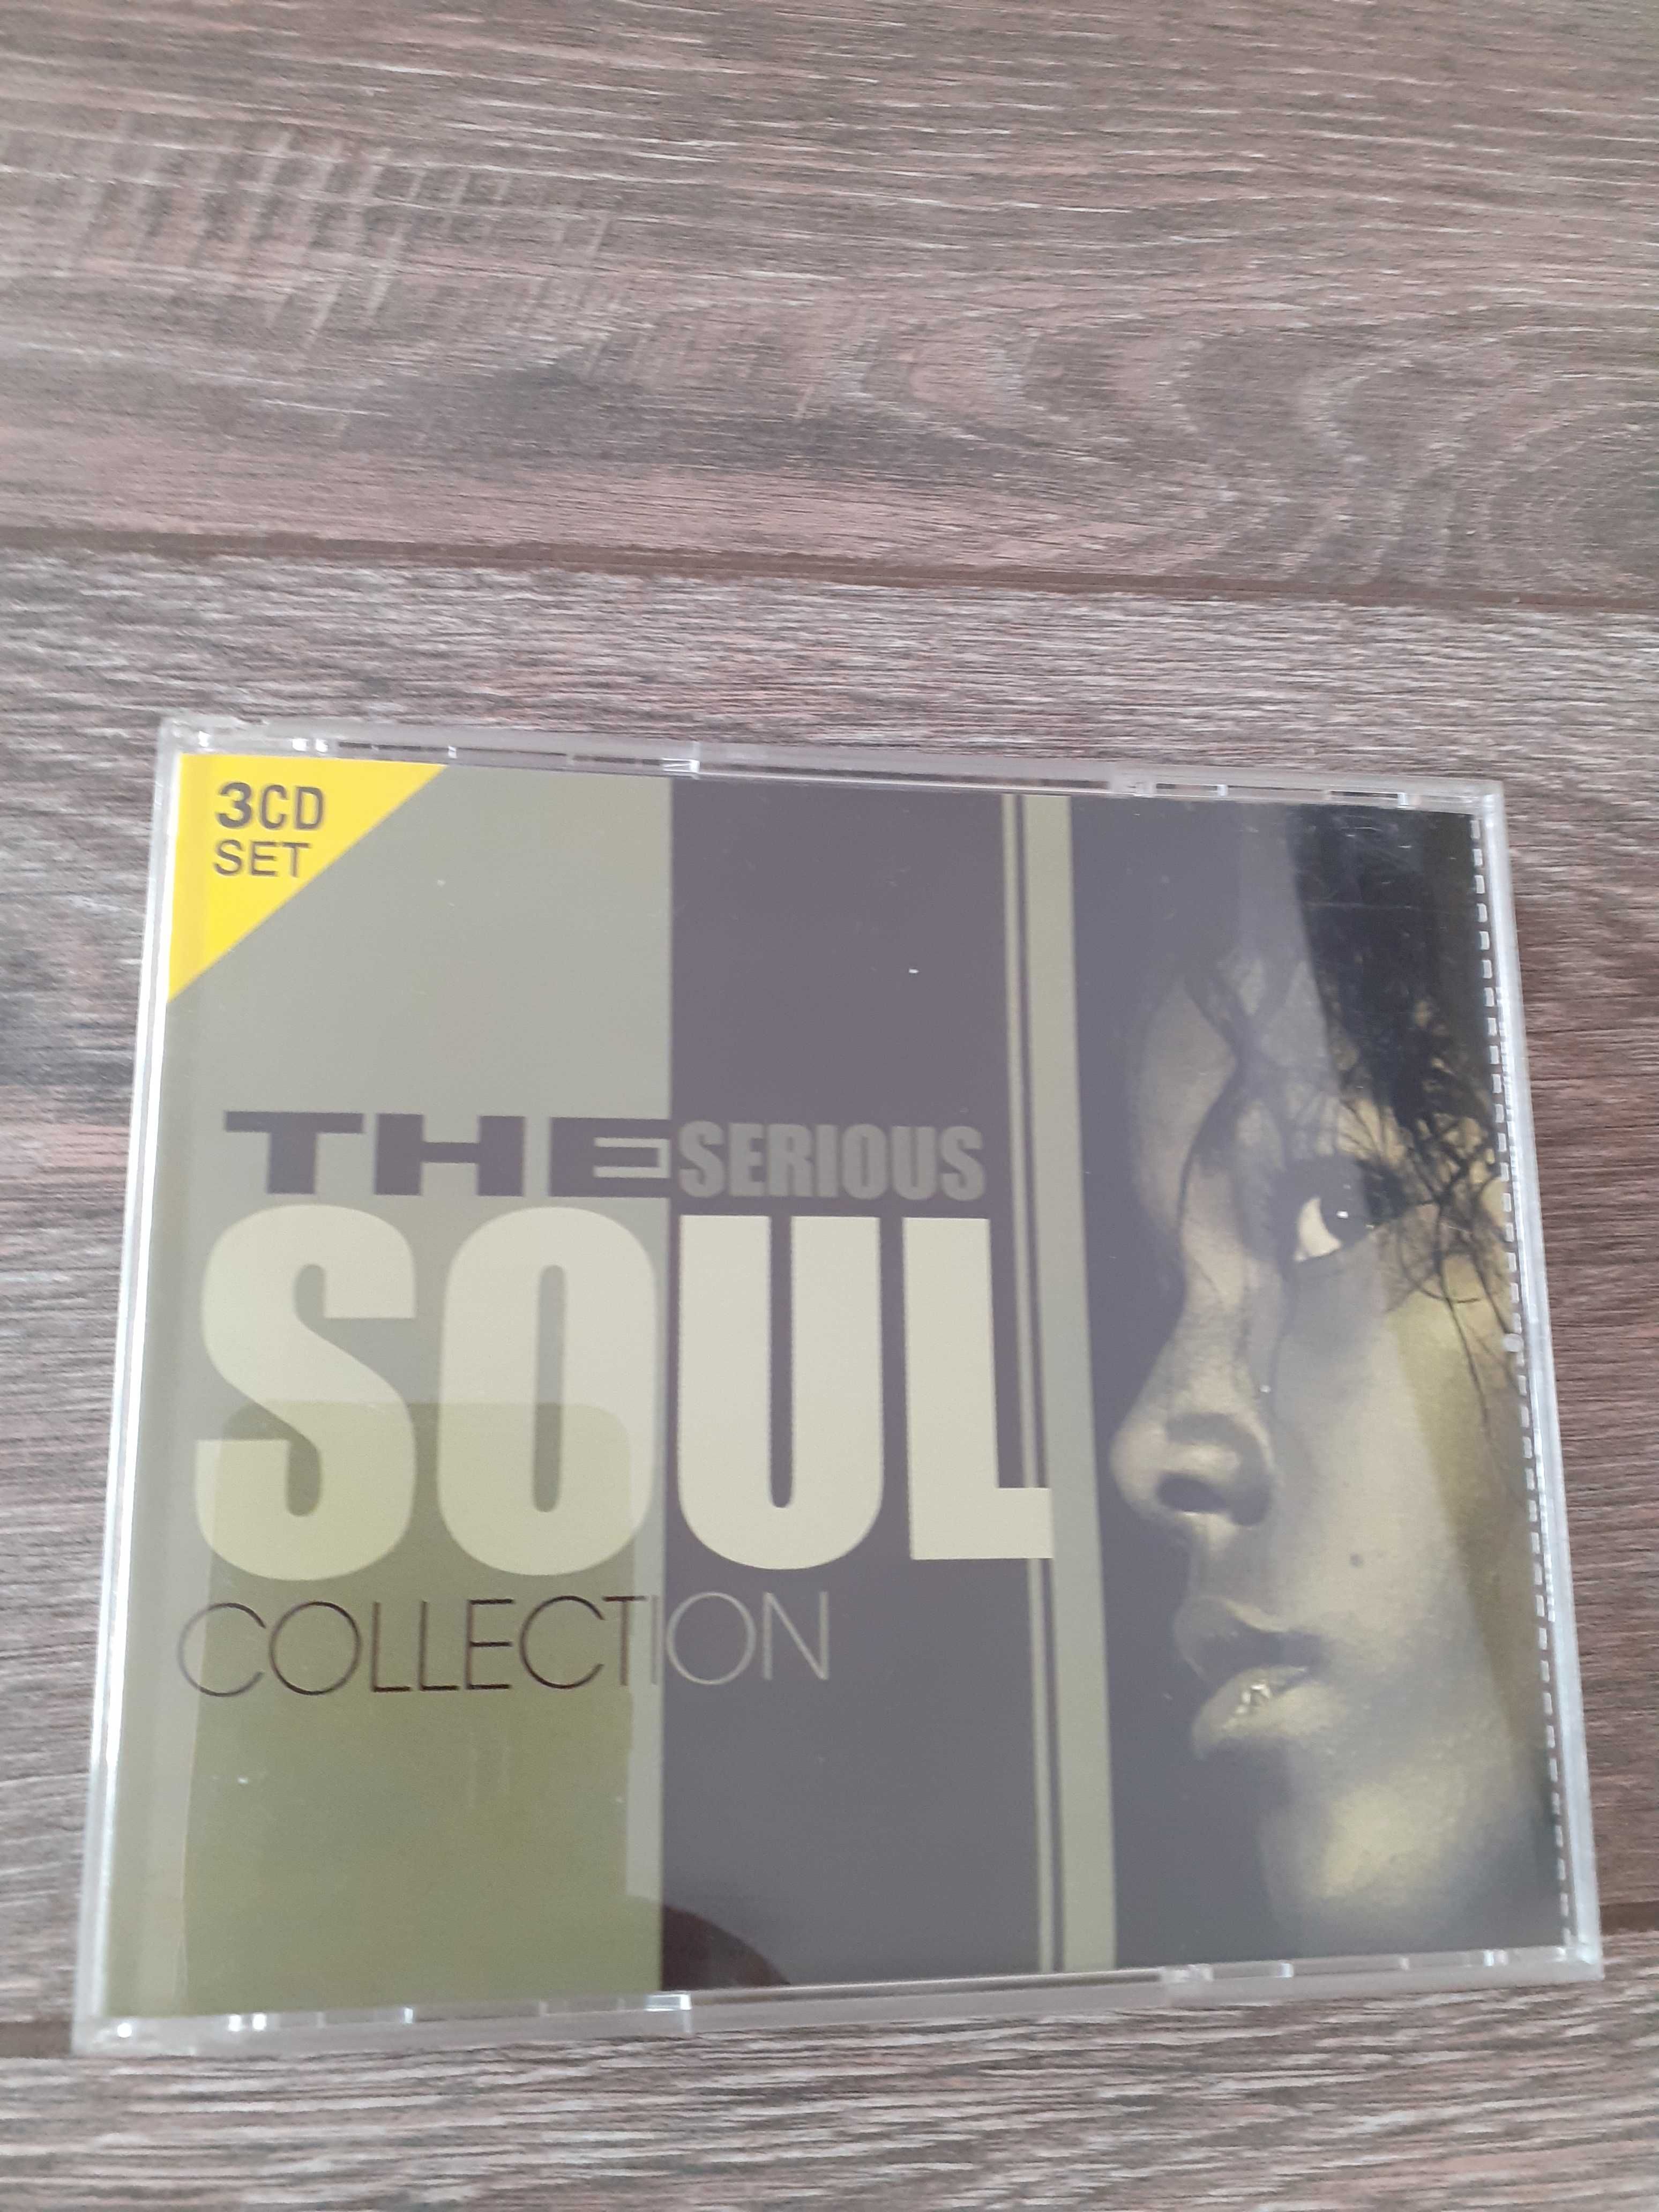 Vand Set Cd Audio(3 buc)-The Serious Soul Colection